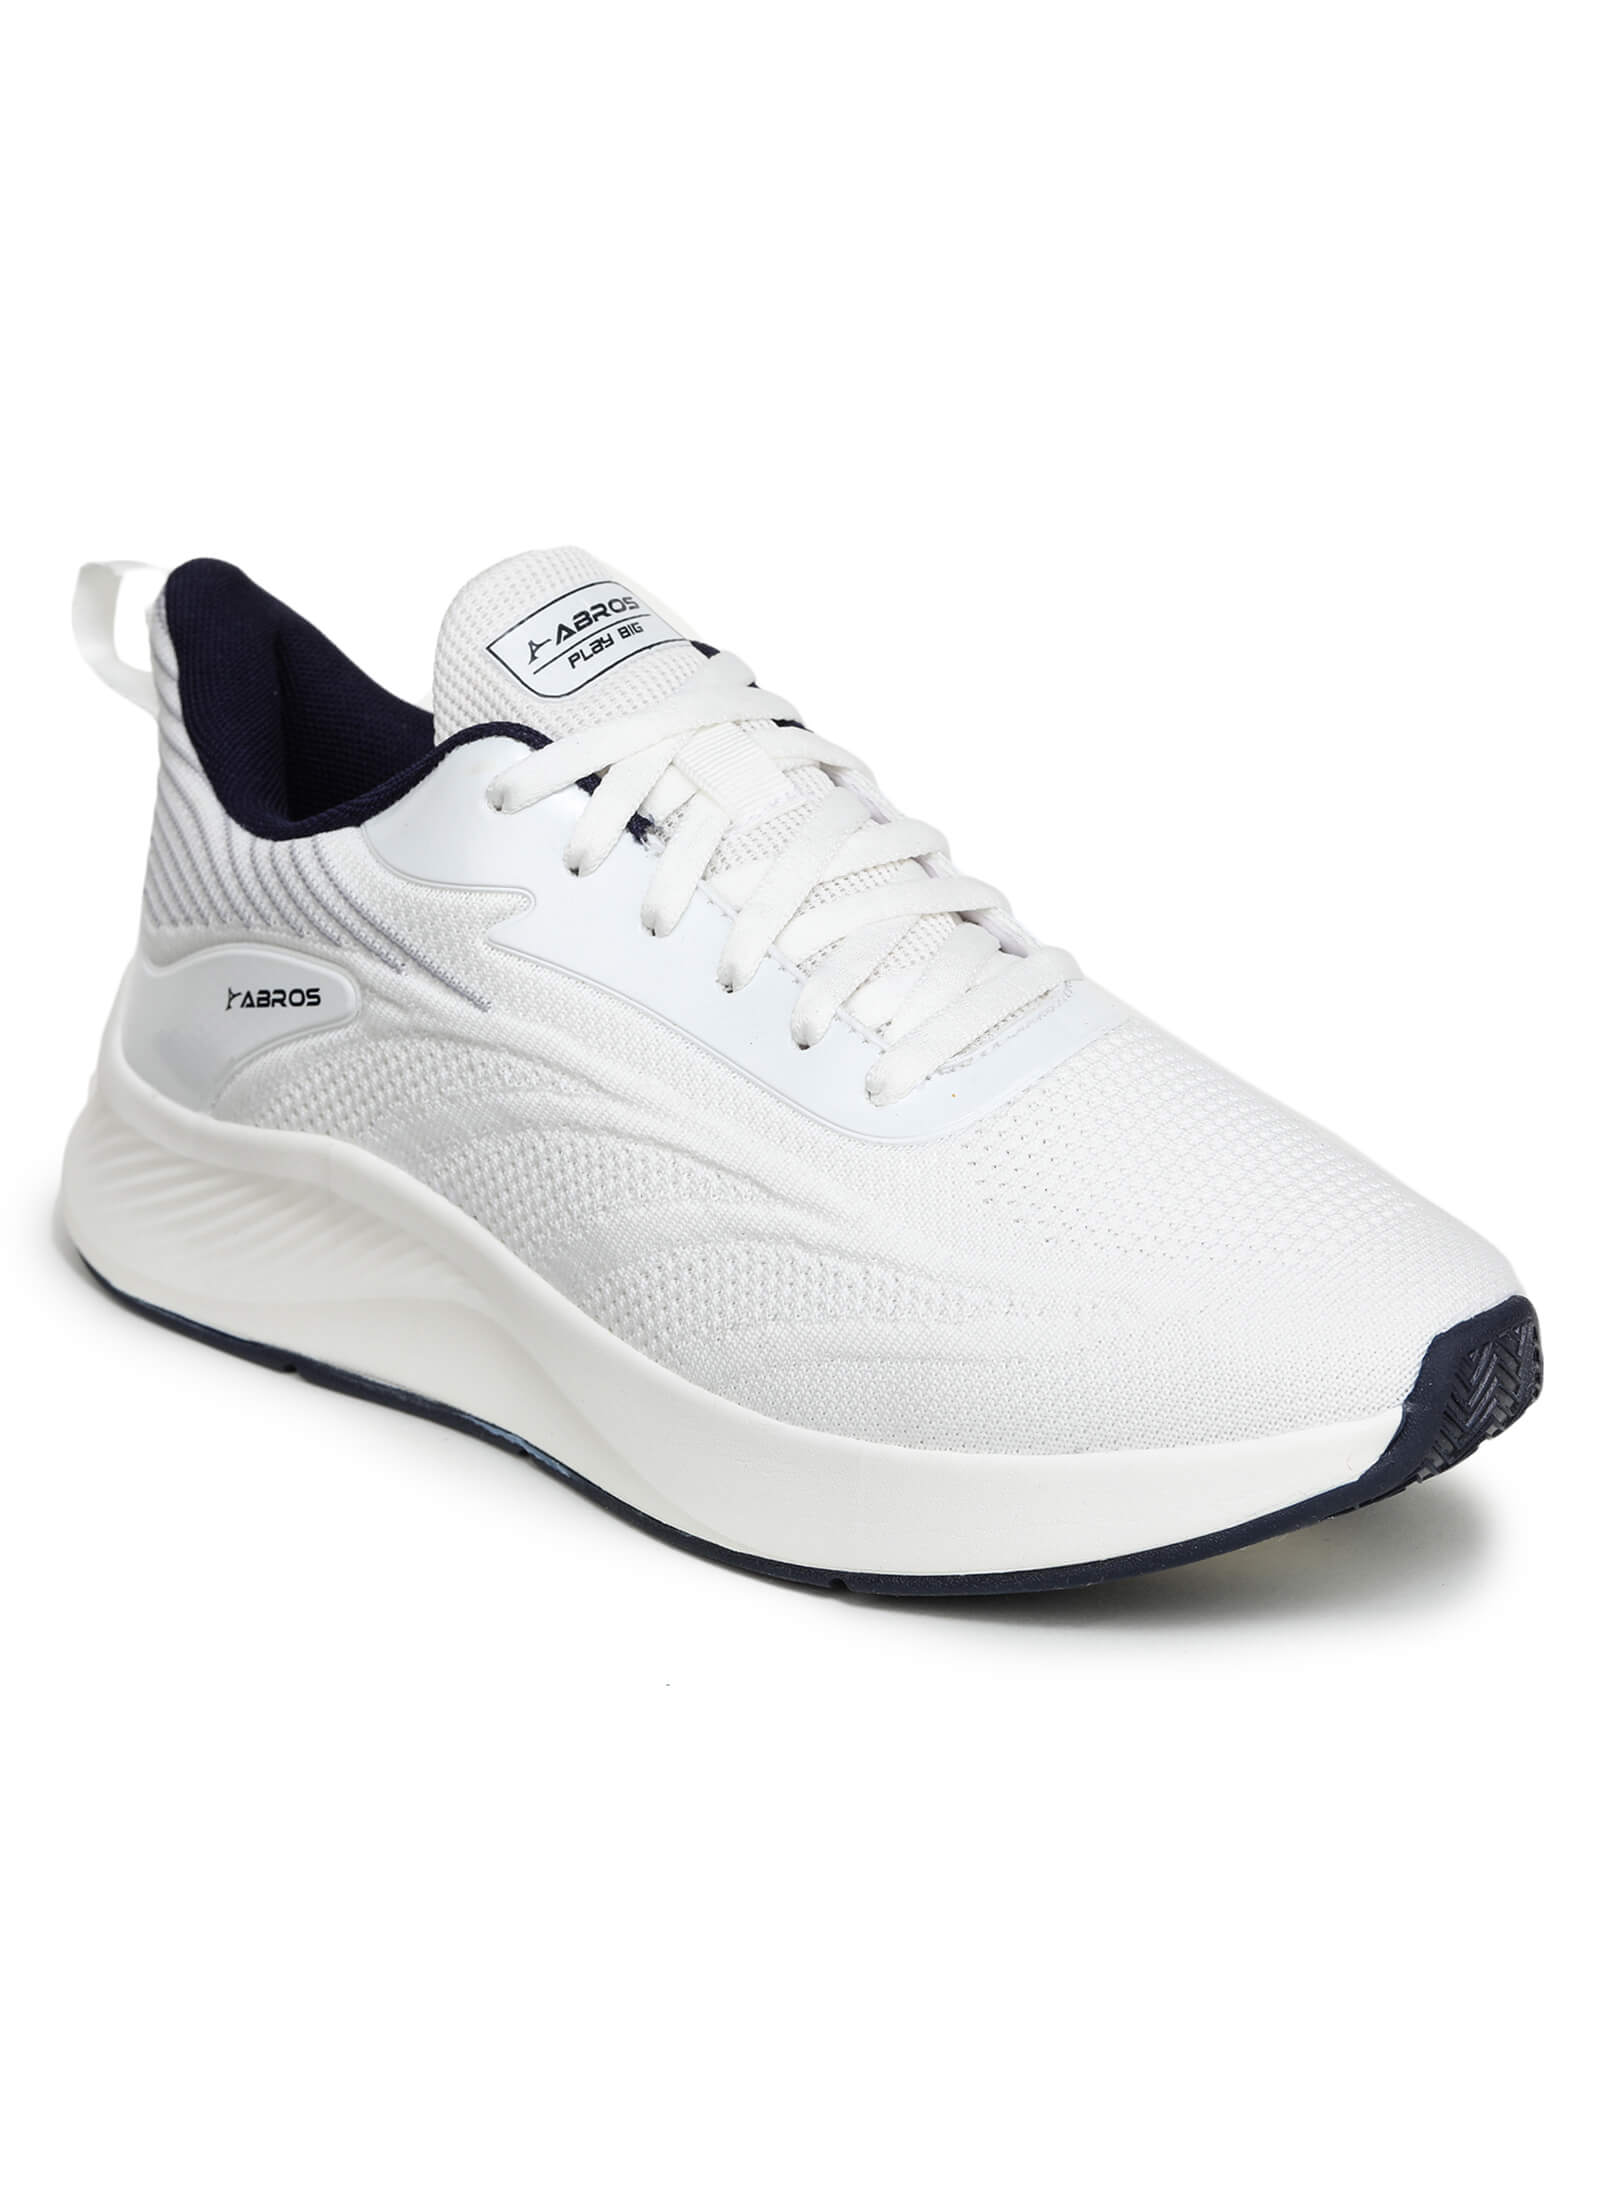 Ford Sports Shoes For Men